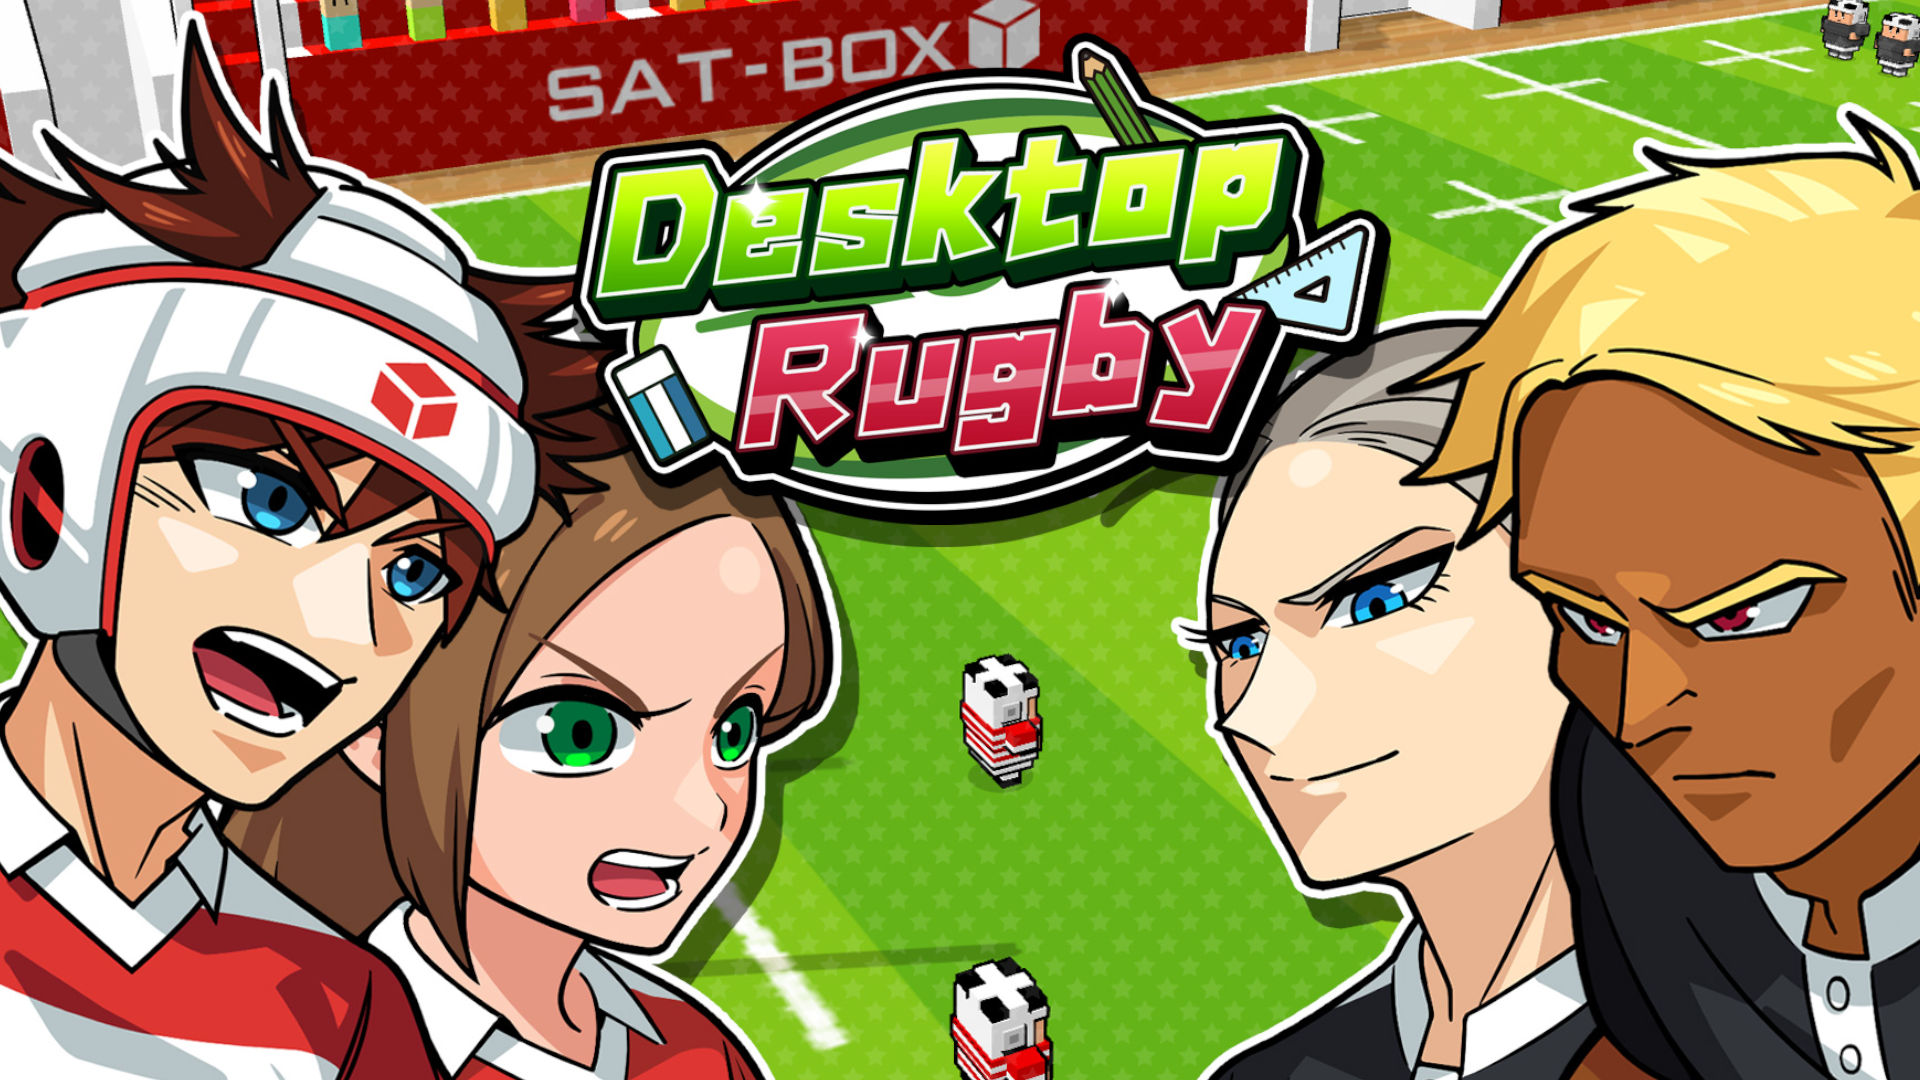 Cover for Desktop Rugby, one of the arcade style rugby games on Switch